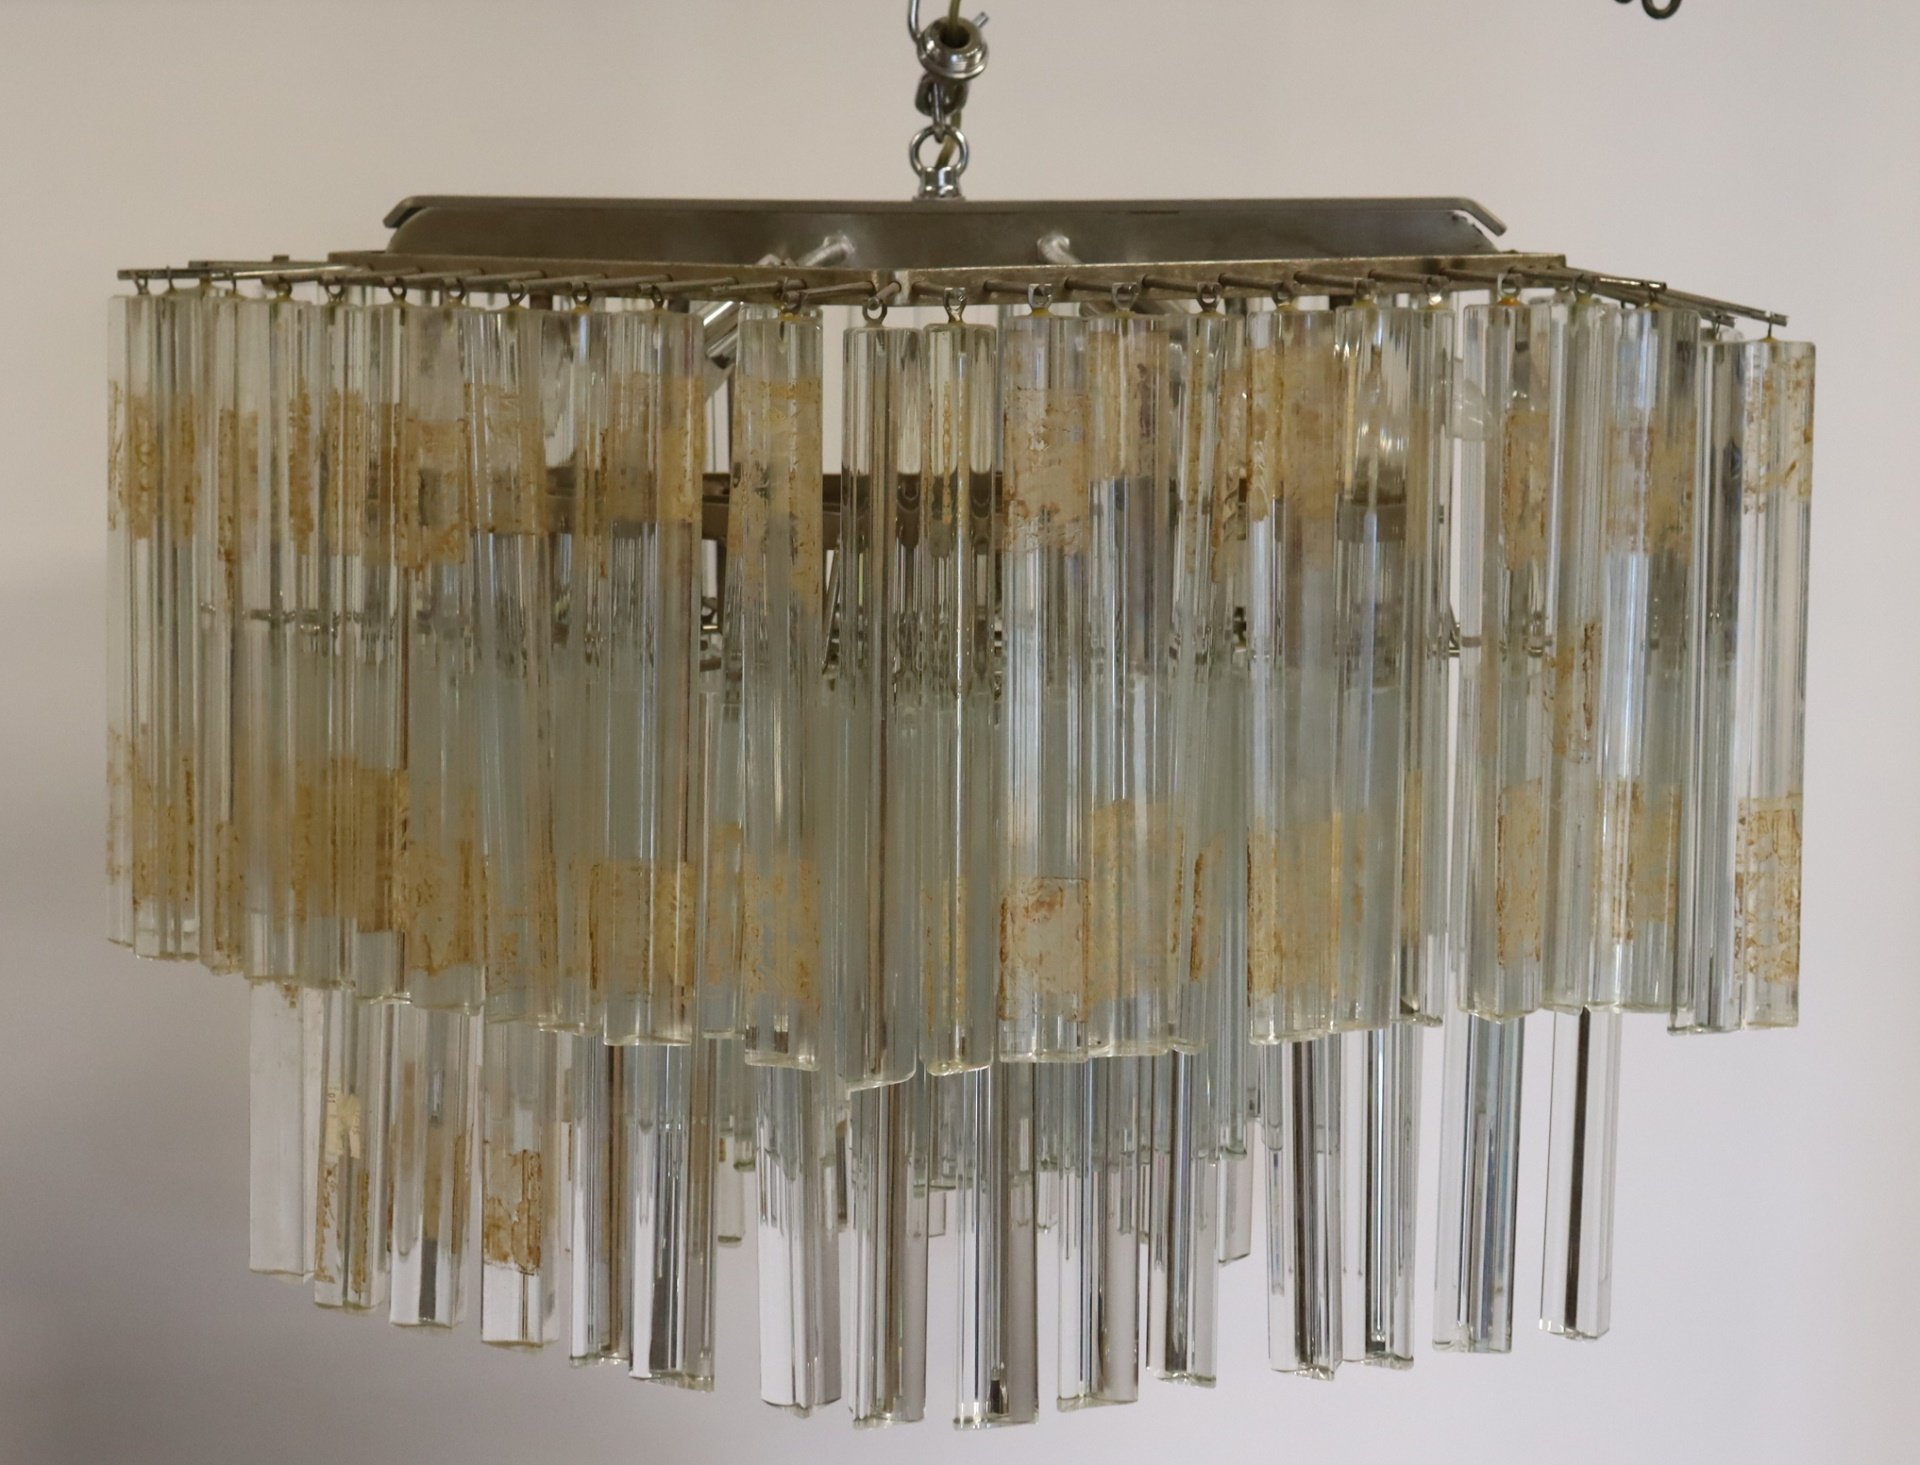 MIDCENTURY CAMER CHANDELIER. From